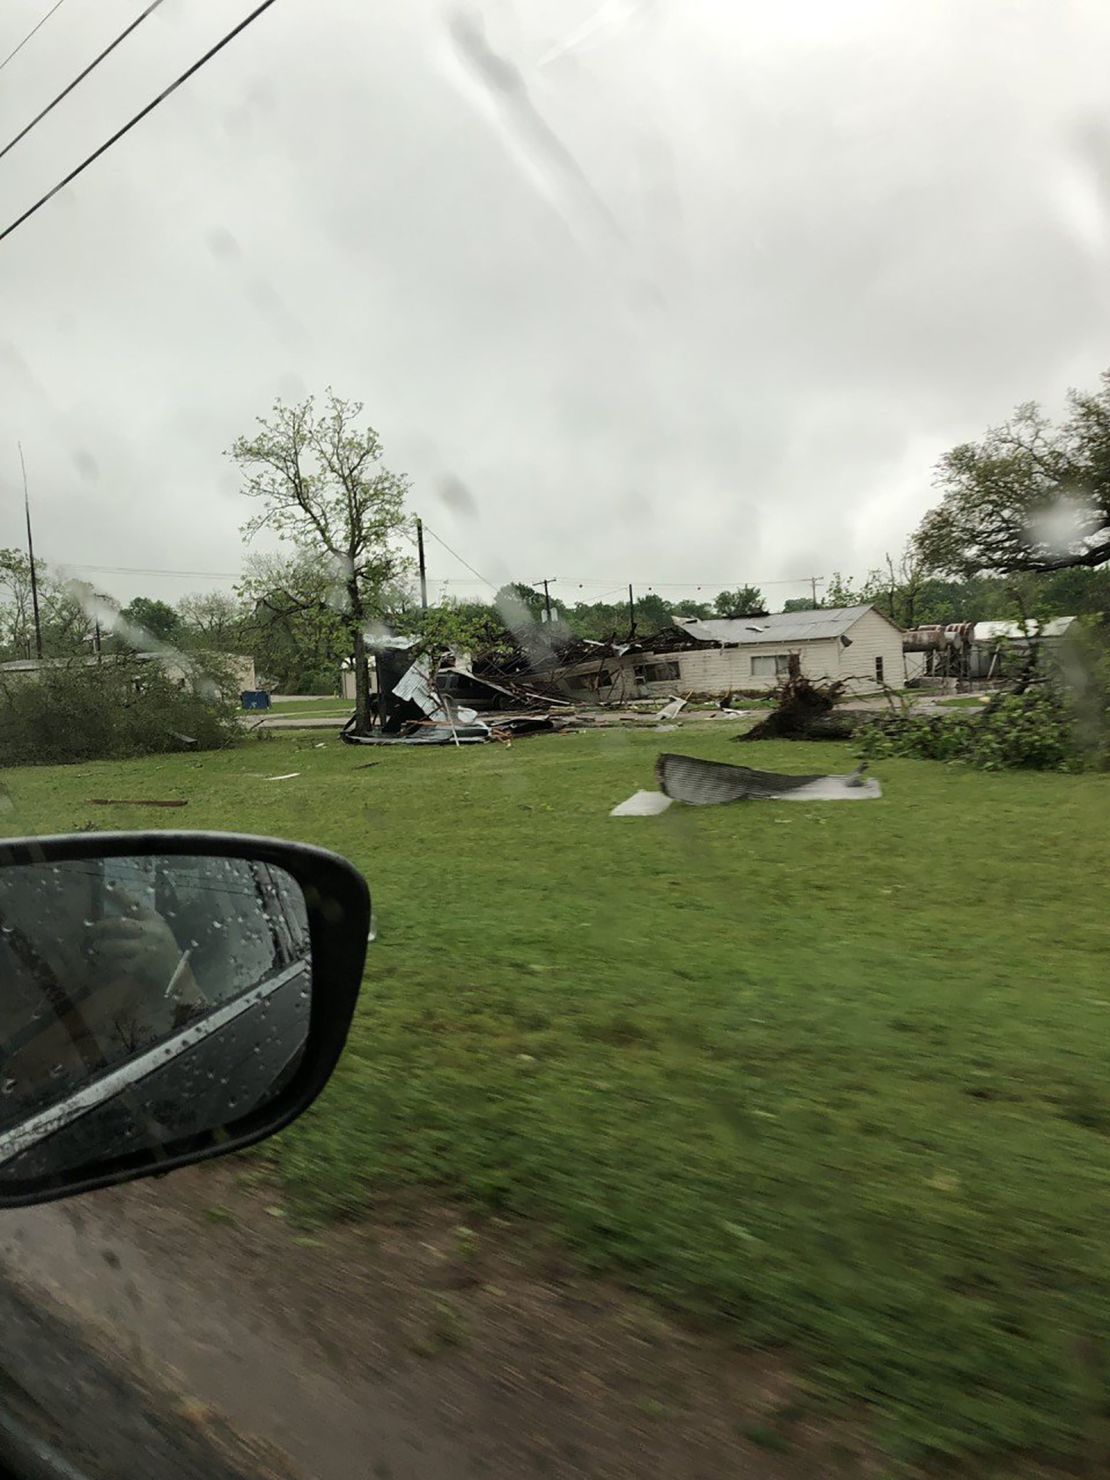 Severe weather, including a possible tornado, pummeled the Texas city of Alto on Saturday. 